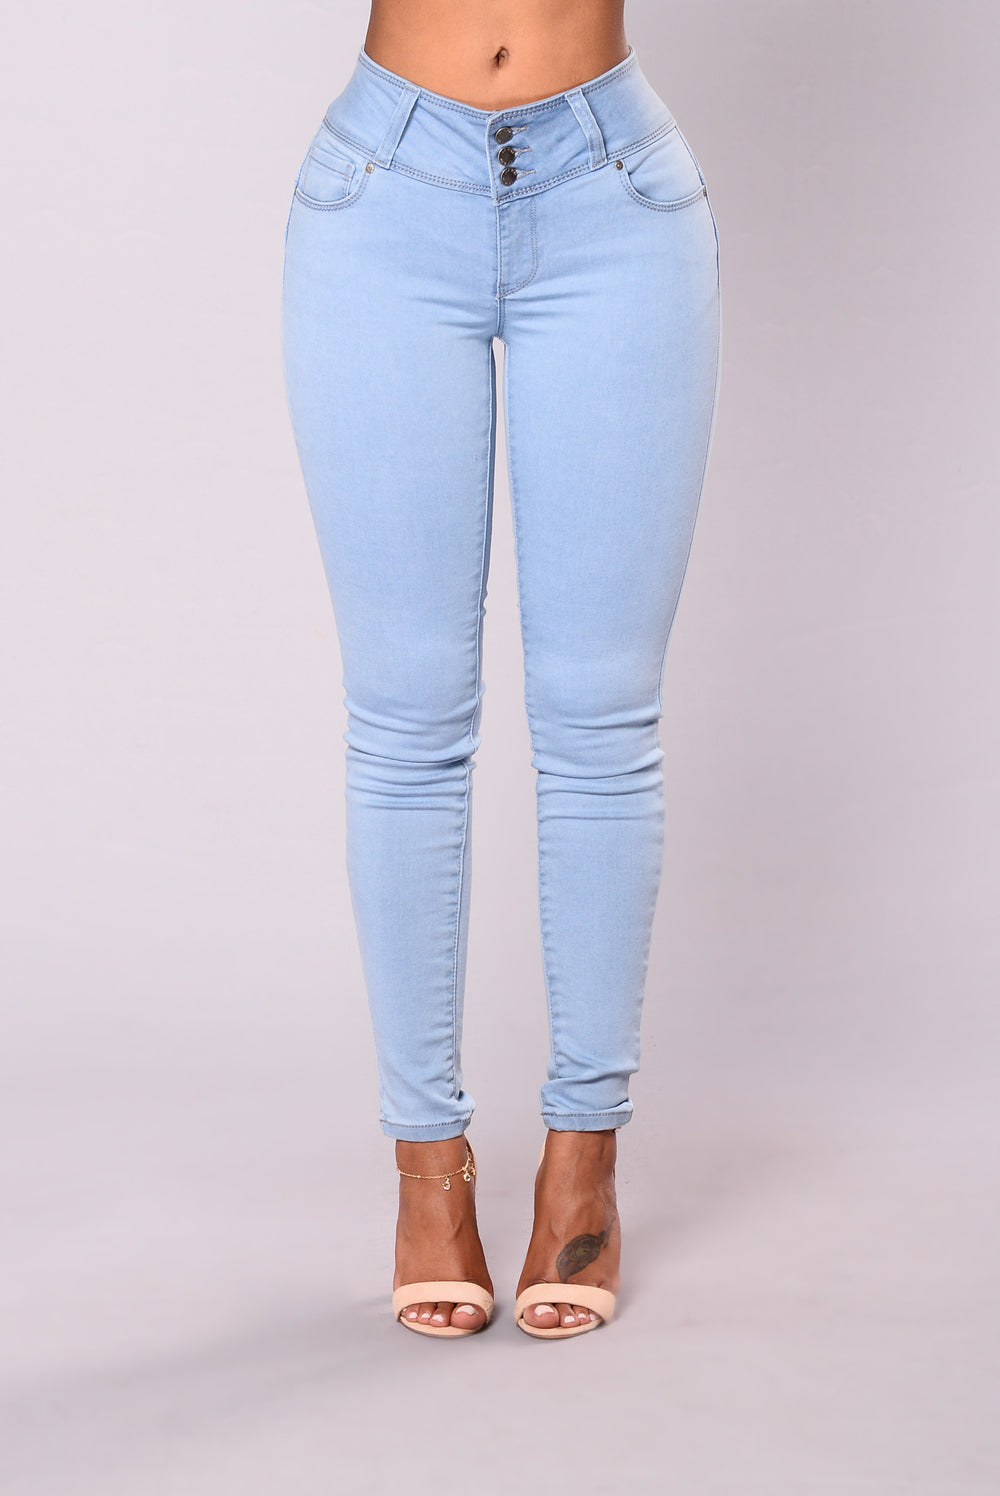 Round Of Applause Booty Shaped Jeans - Light Blue